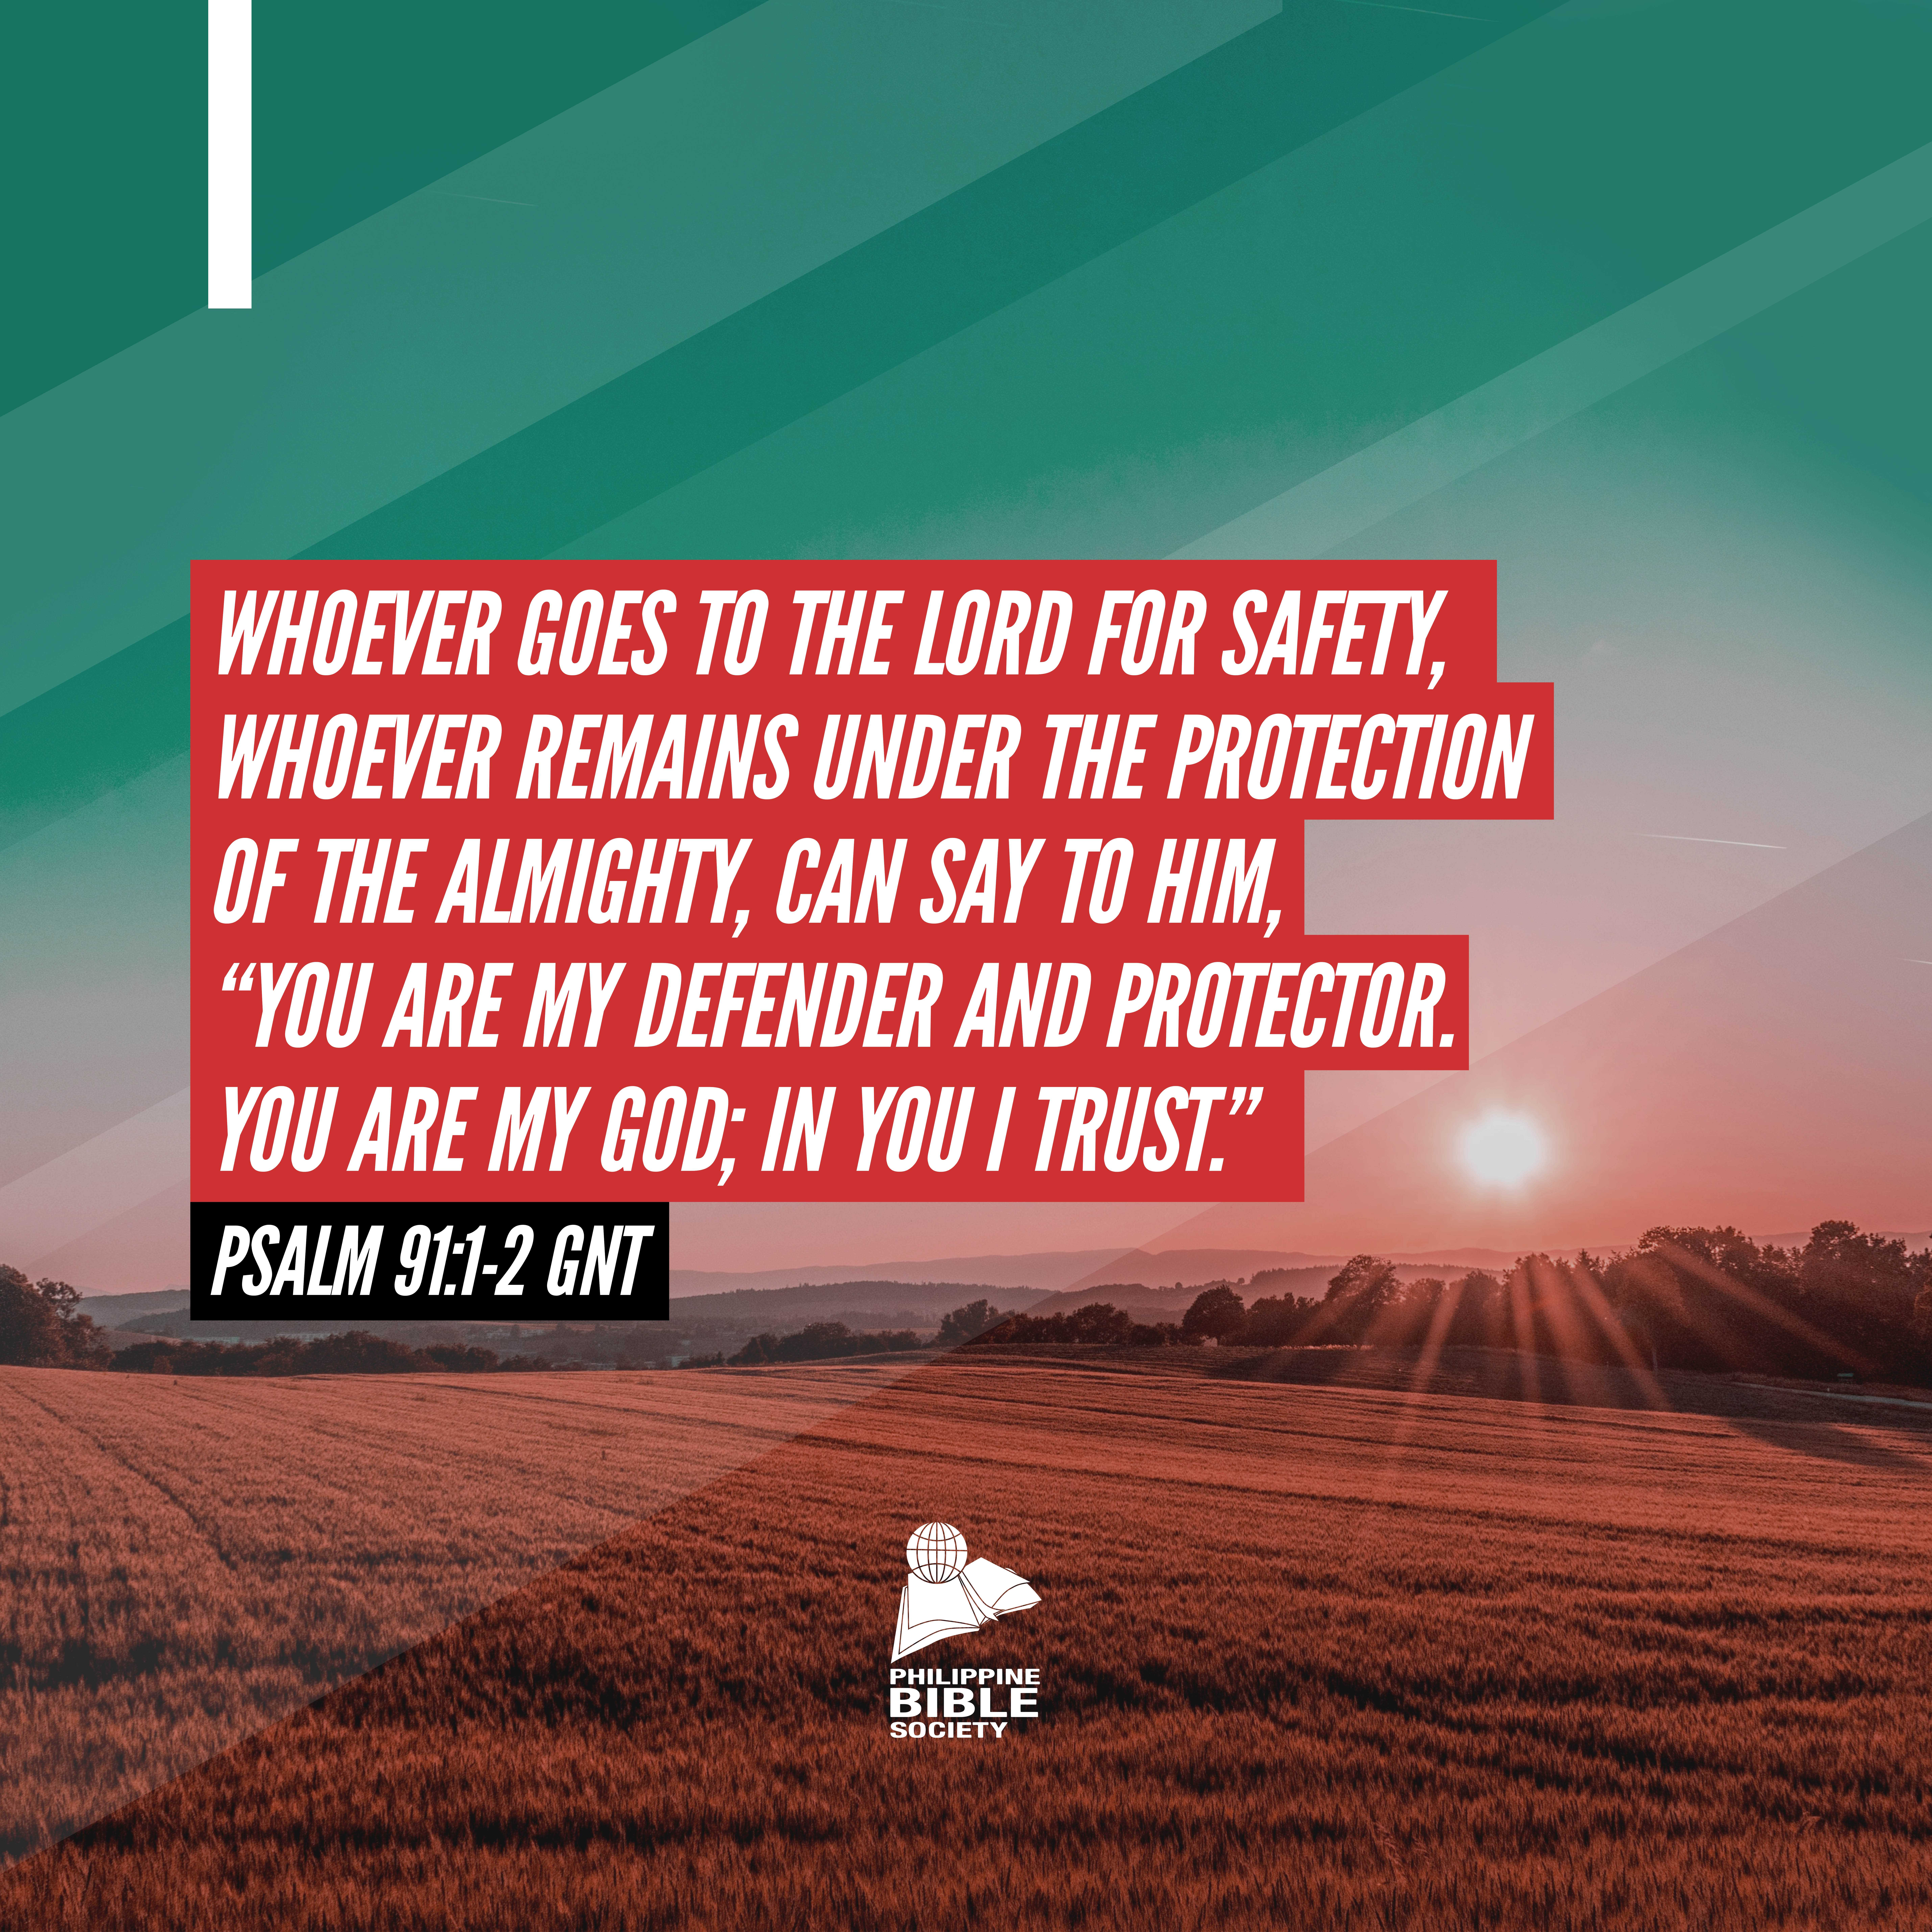 Ps 91.1 2 - Philippine Bible Society